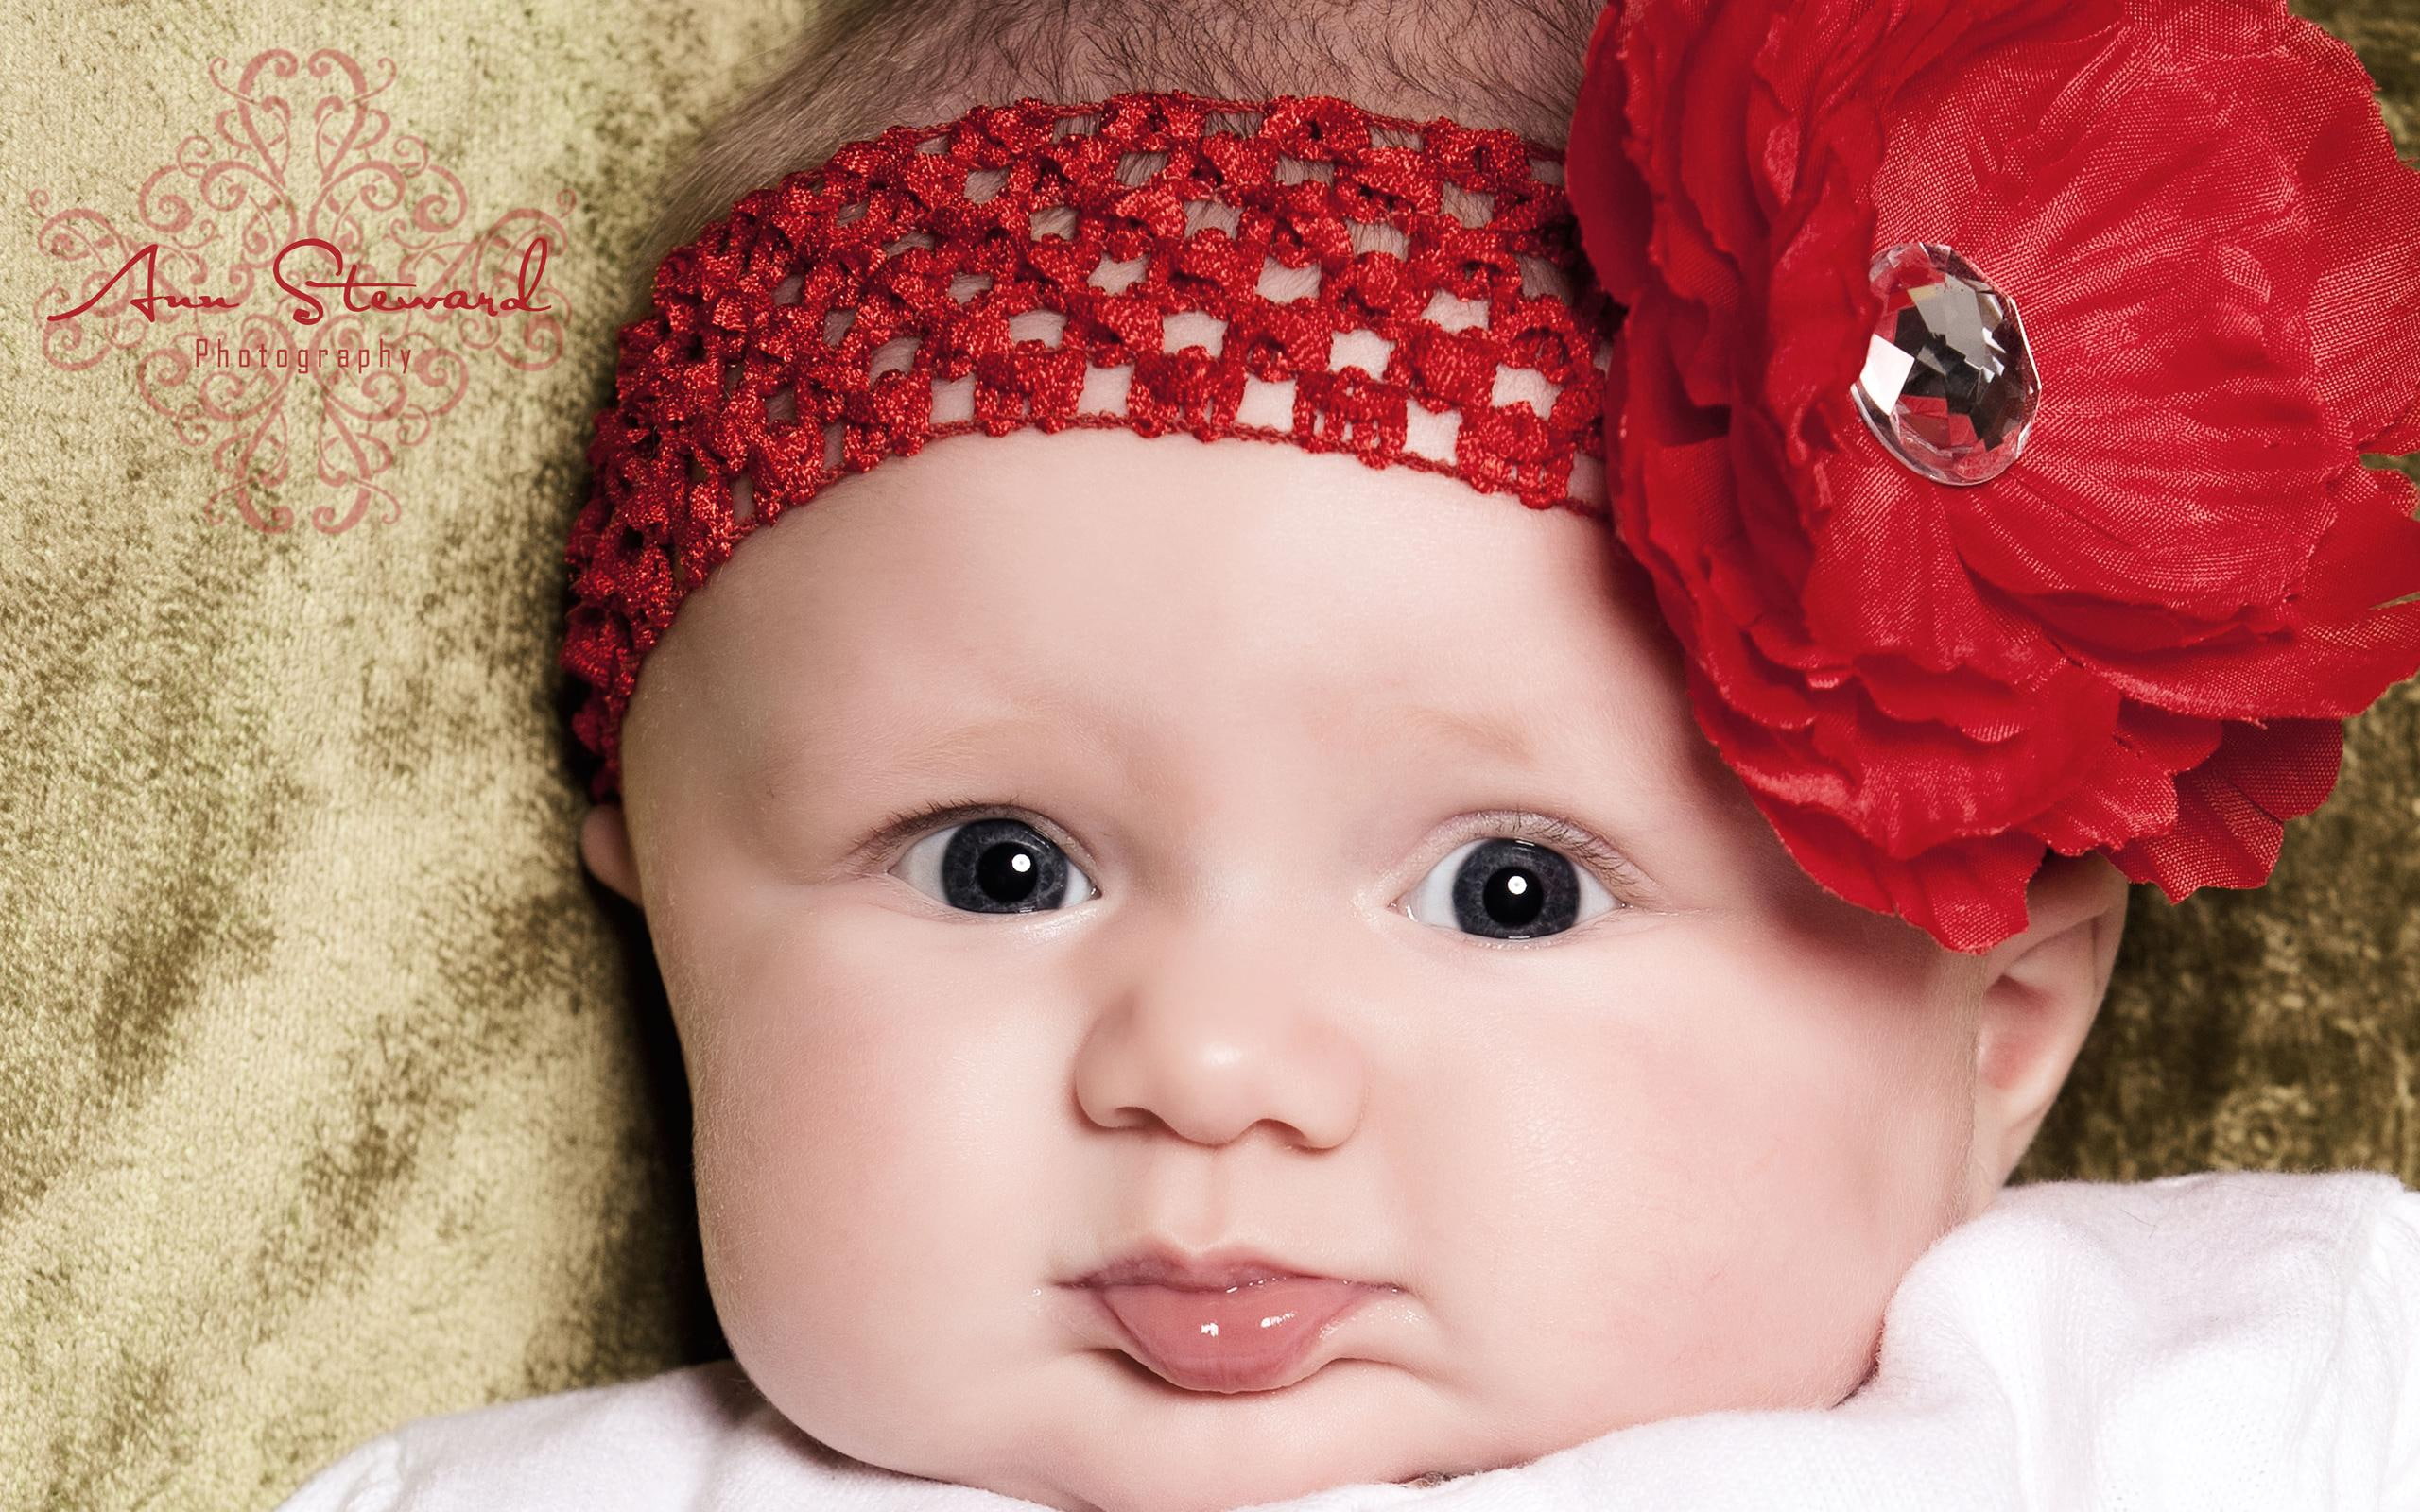 Super Cute Little Baby, baby's red floral headband